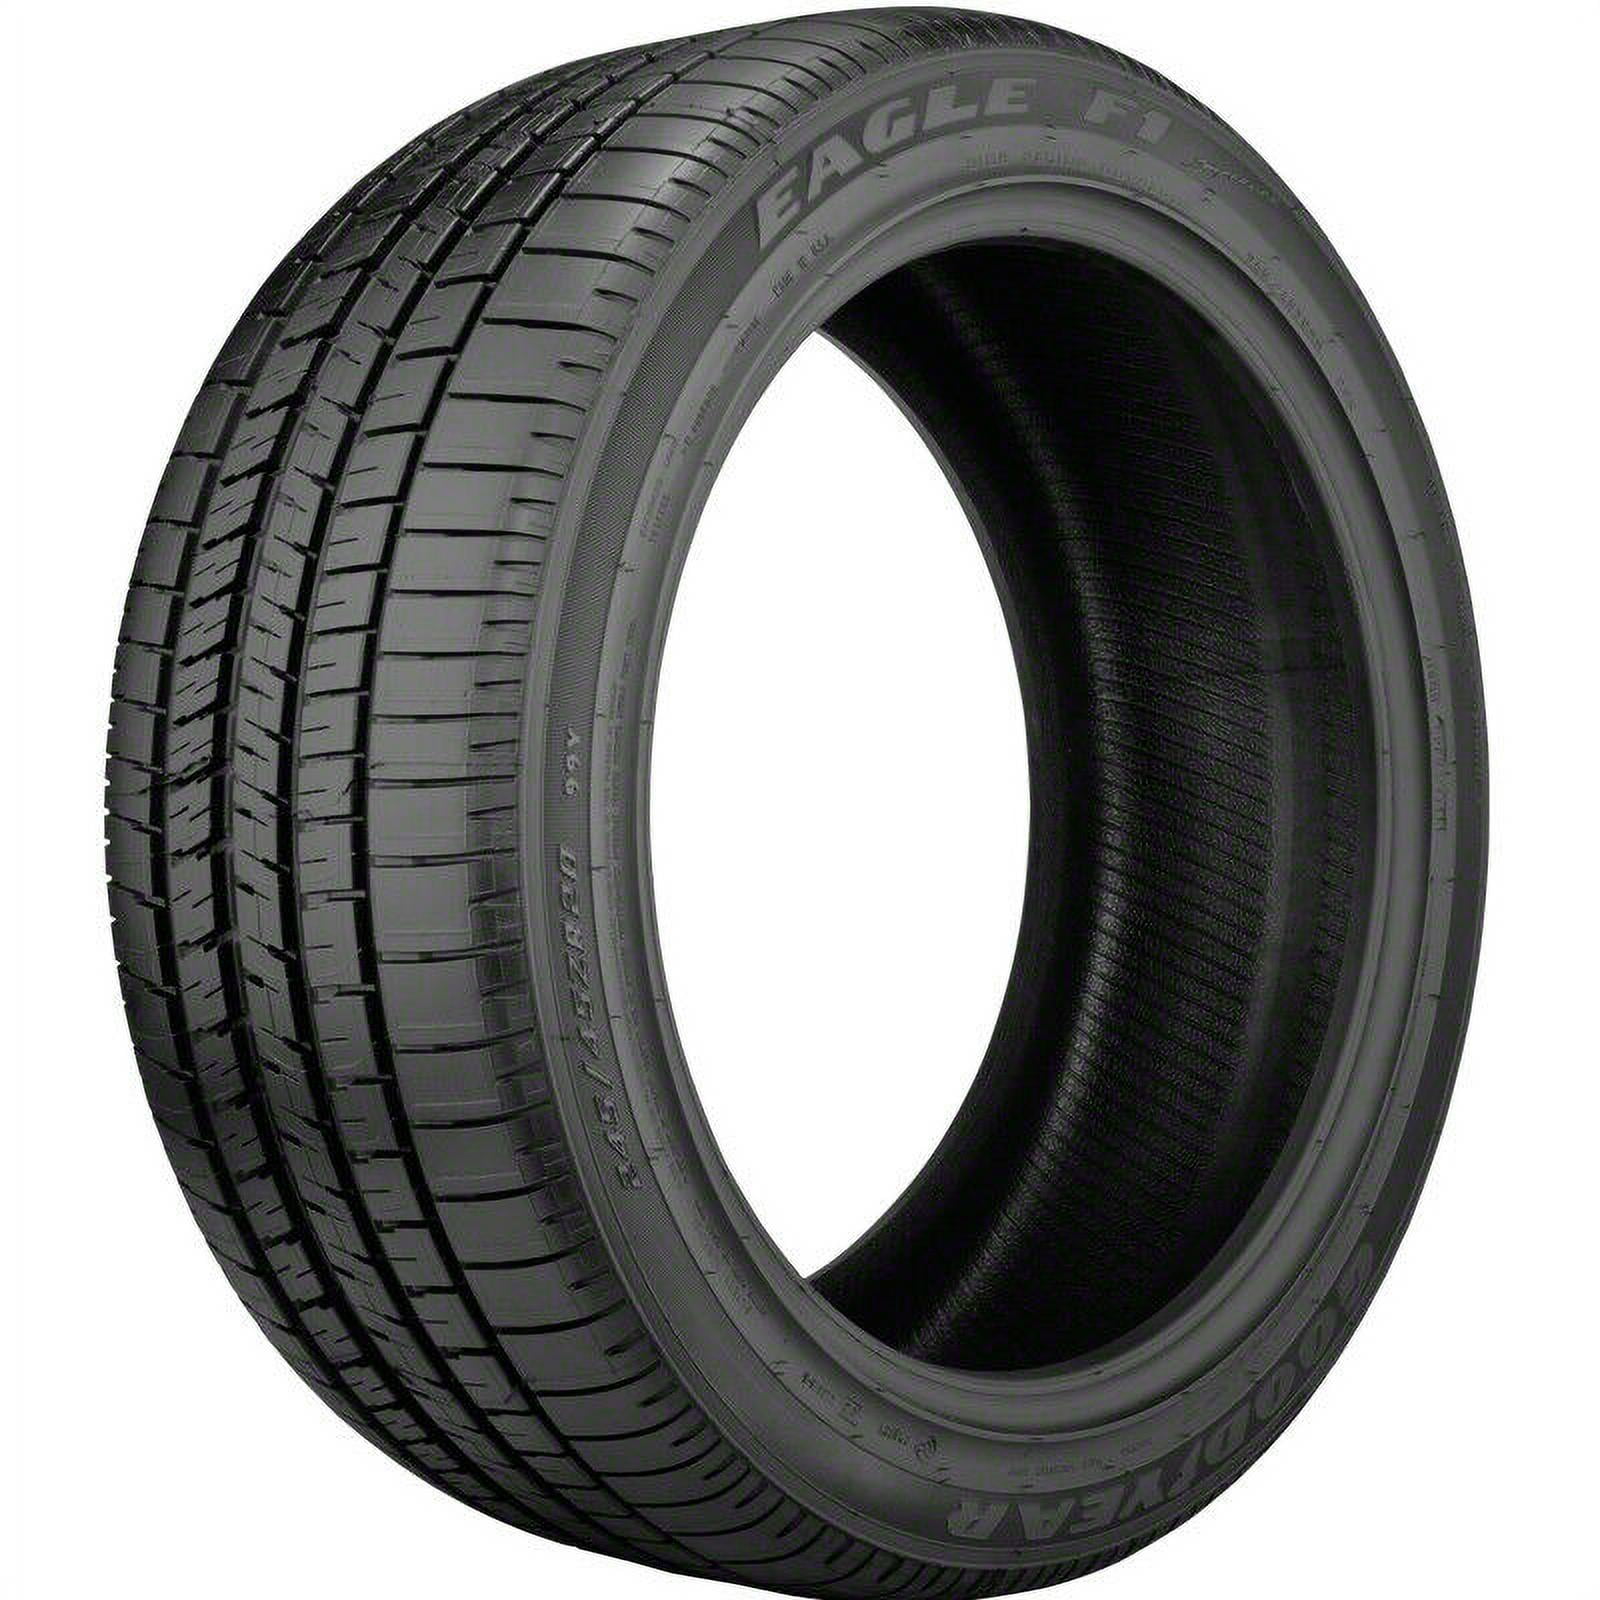 Goodyear Eagle F1 SuperCar UHP 245/45R20 99Y Passenger Tire